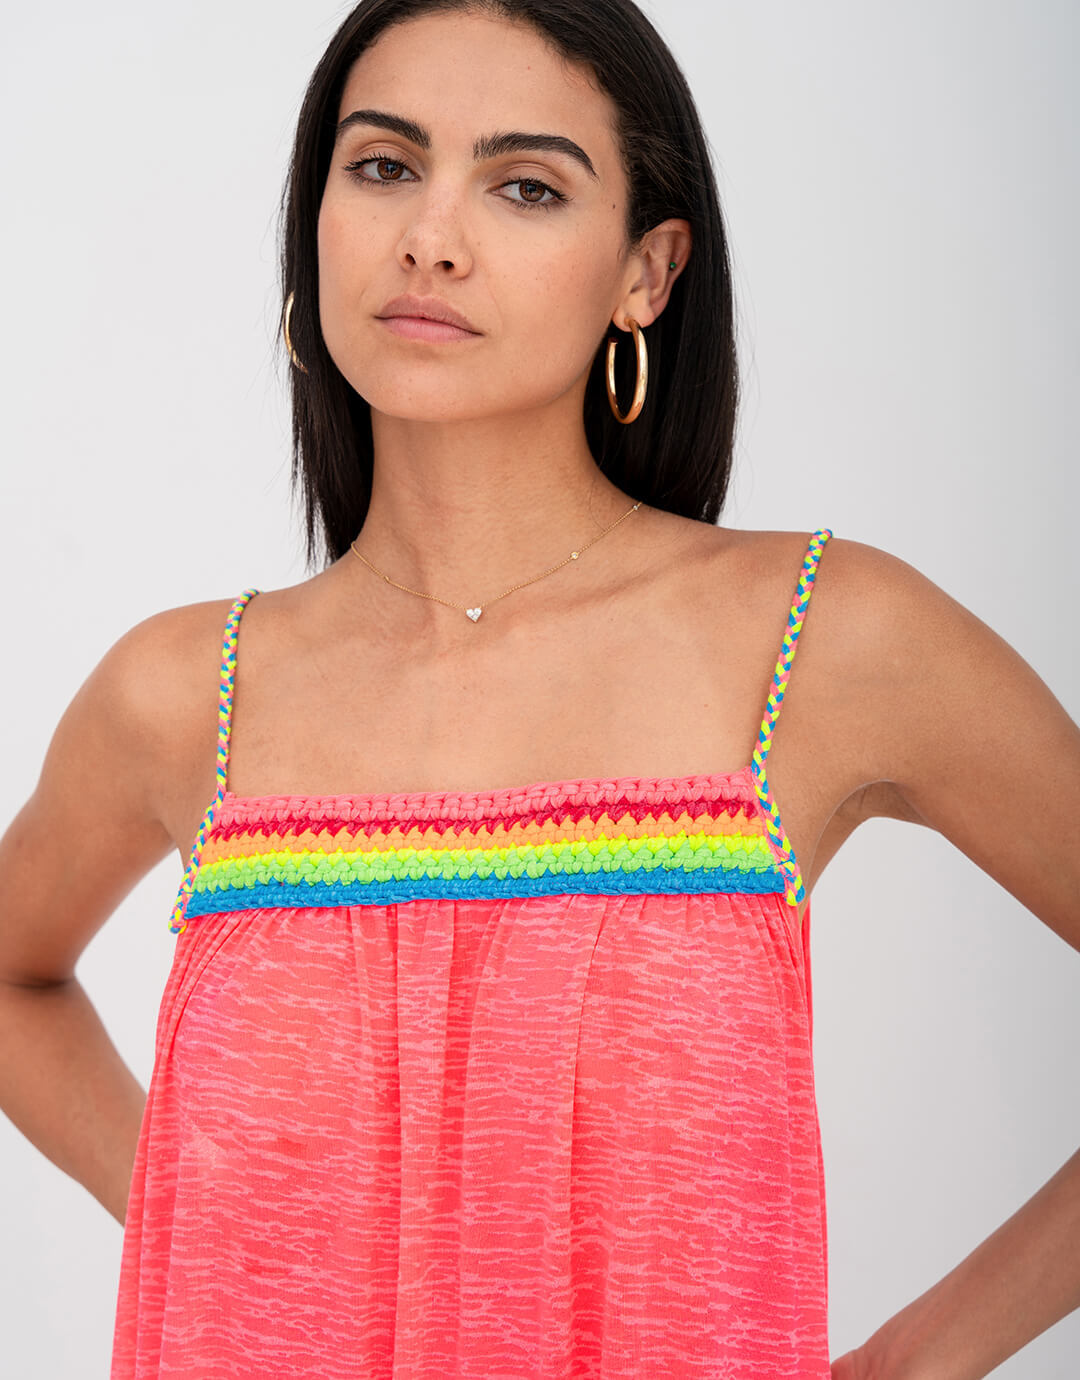 Braided Low Back Dress - Hot Pink - Simply Beach UK